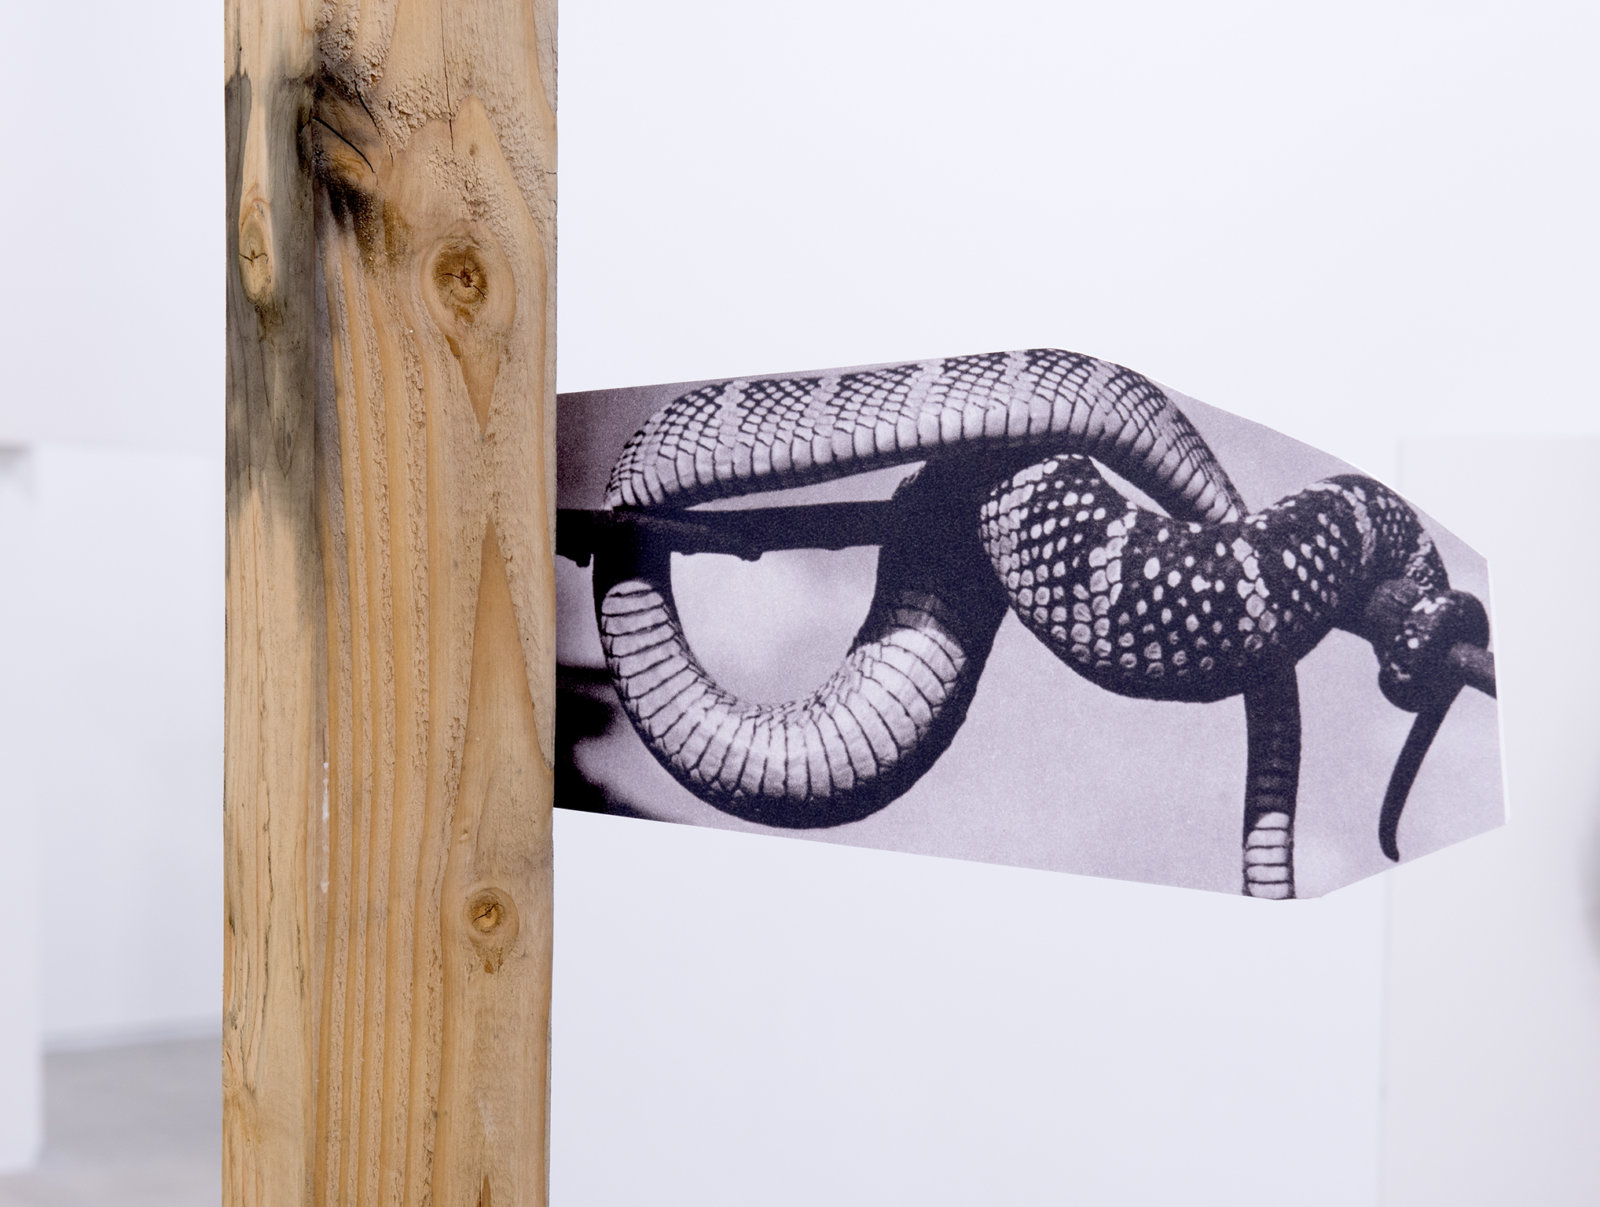 Geoffrey Farmer, The other ate one man, one man was set adrift, one man turned into a snake, one man washed ashore and became a statue and the others eyes were stolen by the owl. (detail), 2014, douglas fir pole, 6 photographs mounted on foamcore, 200 x 4 x 4 in. (508 x 9 x 9 cm)